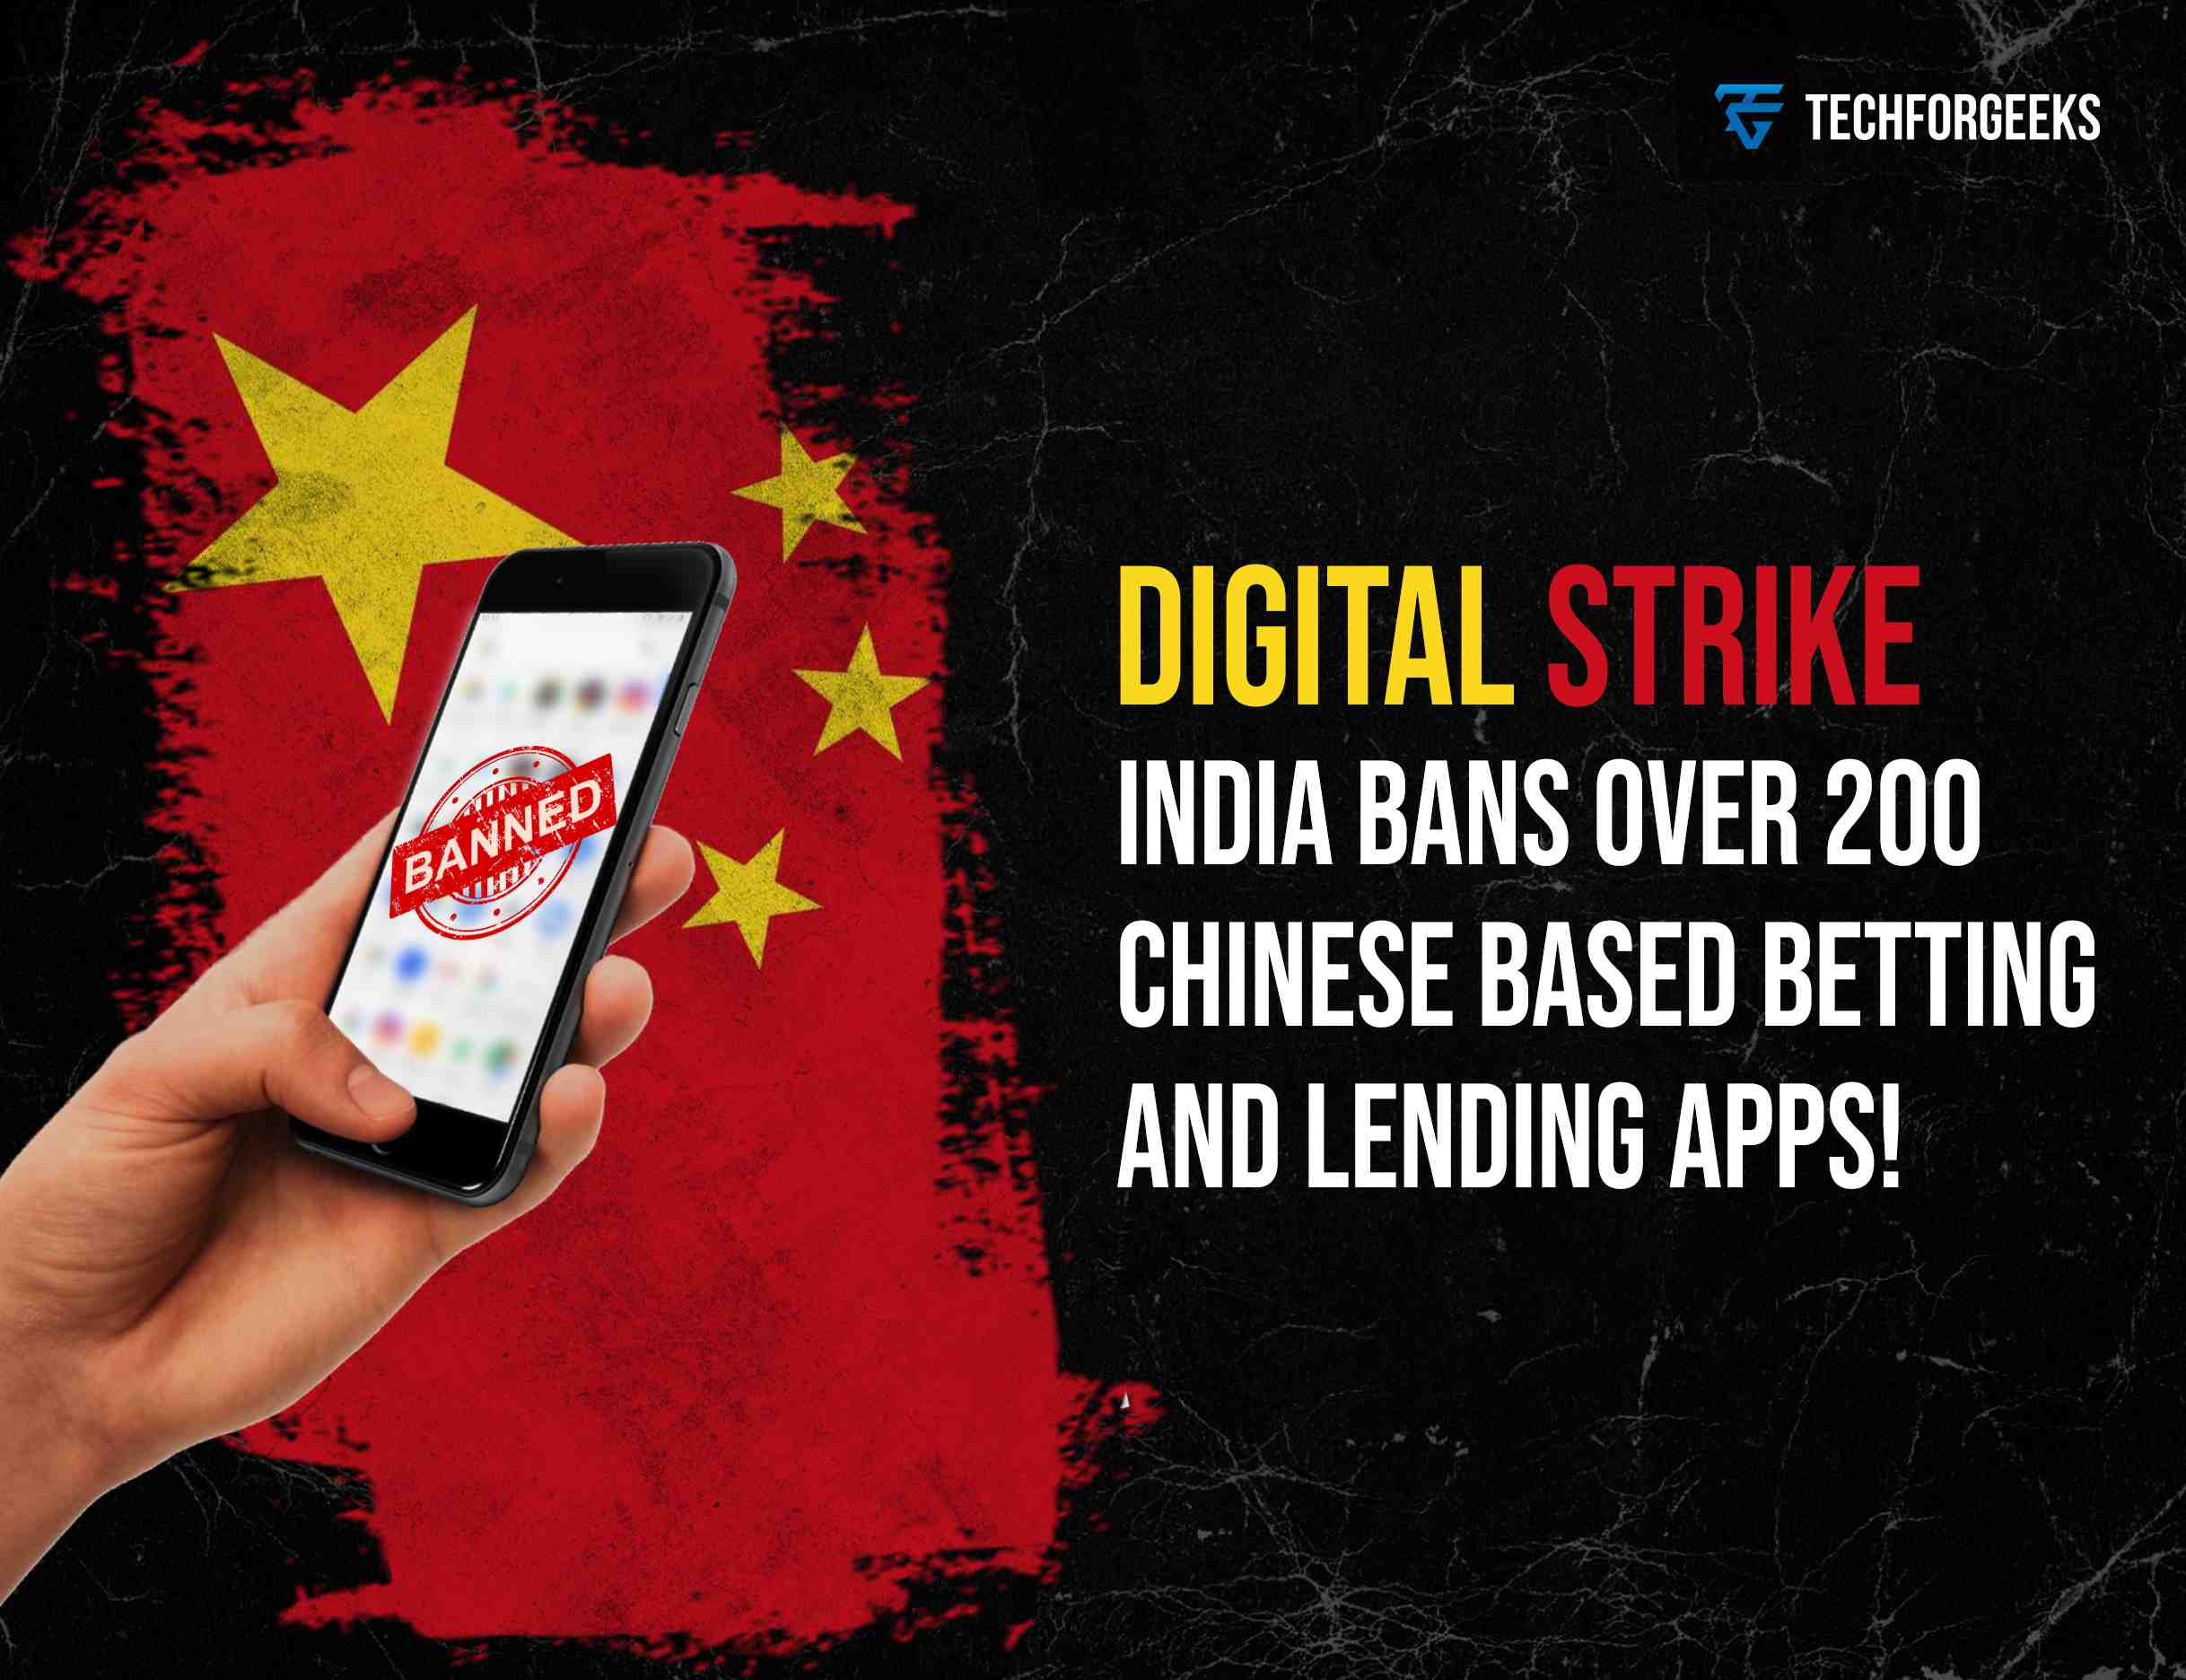 Digital Strike: India bans over 200 Chinese-based betting and lending apps!